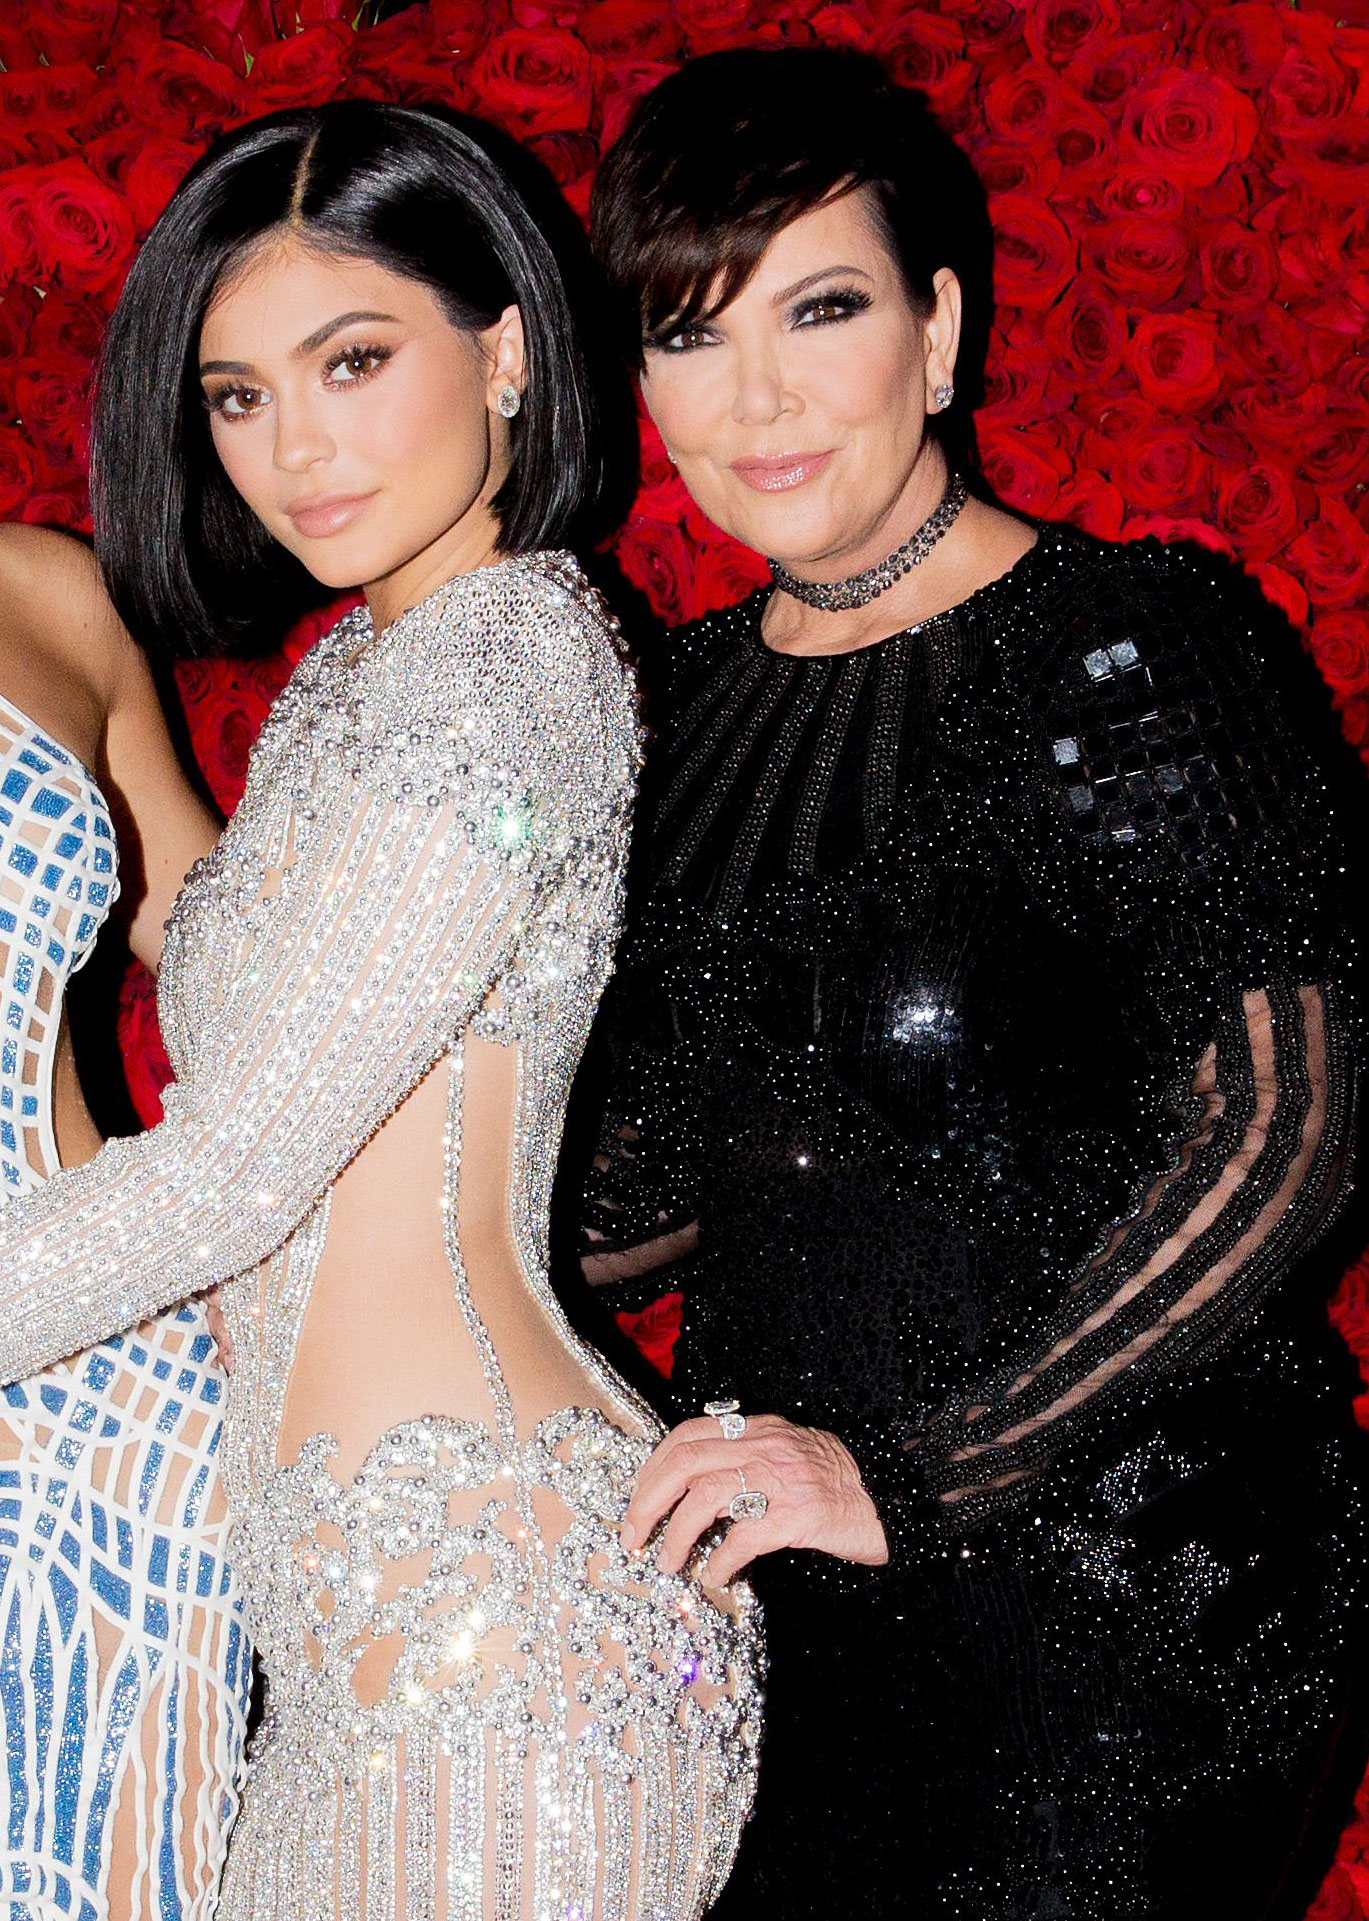 Kris Jenner Talks About Kylie Selling Her Brand To Coty